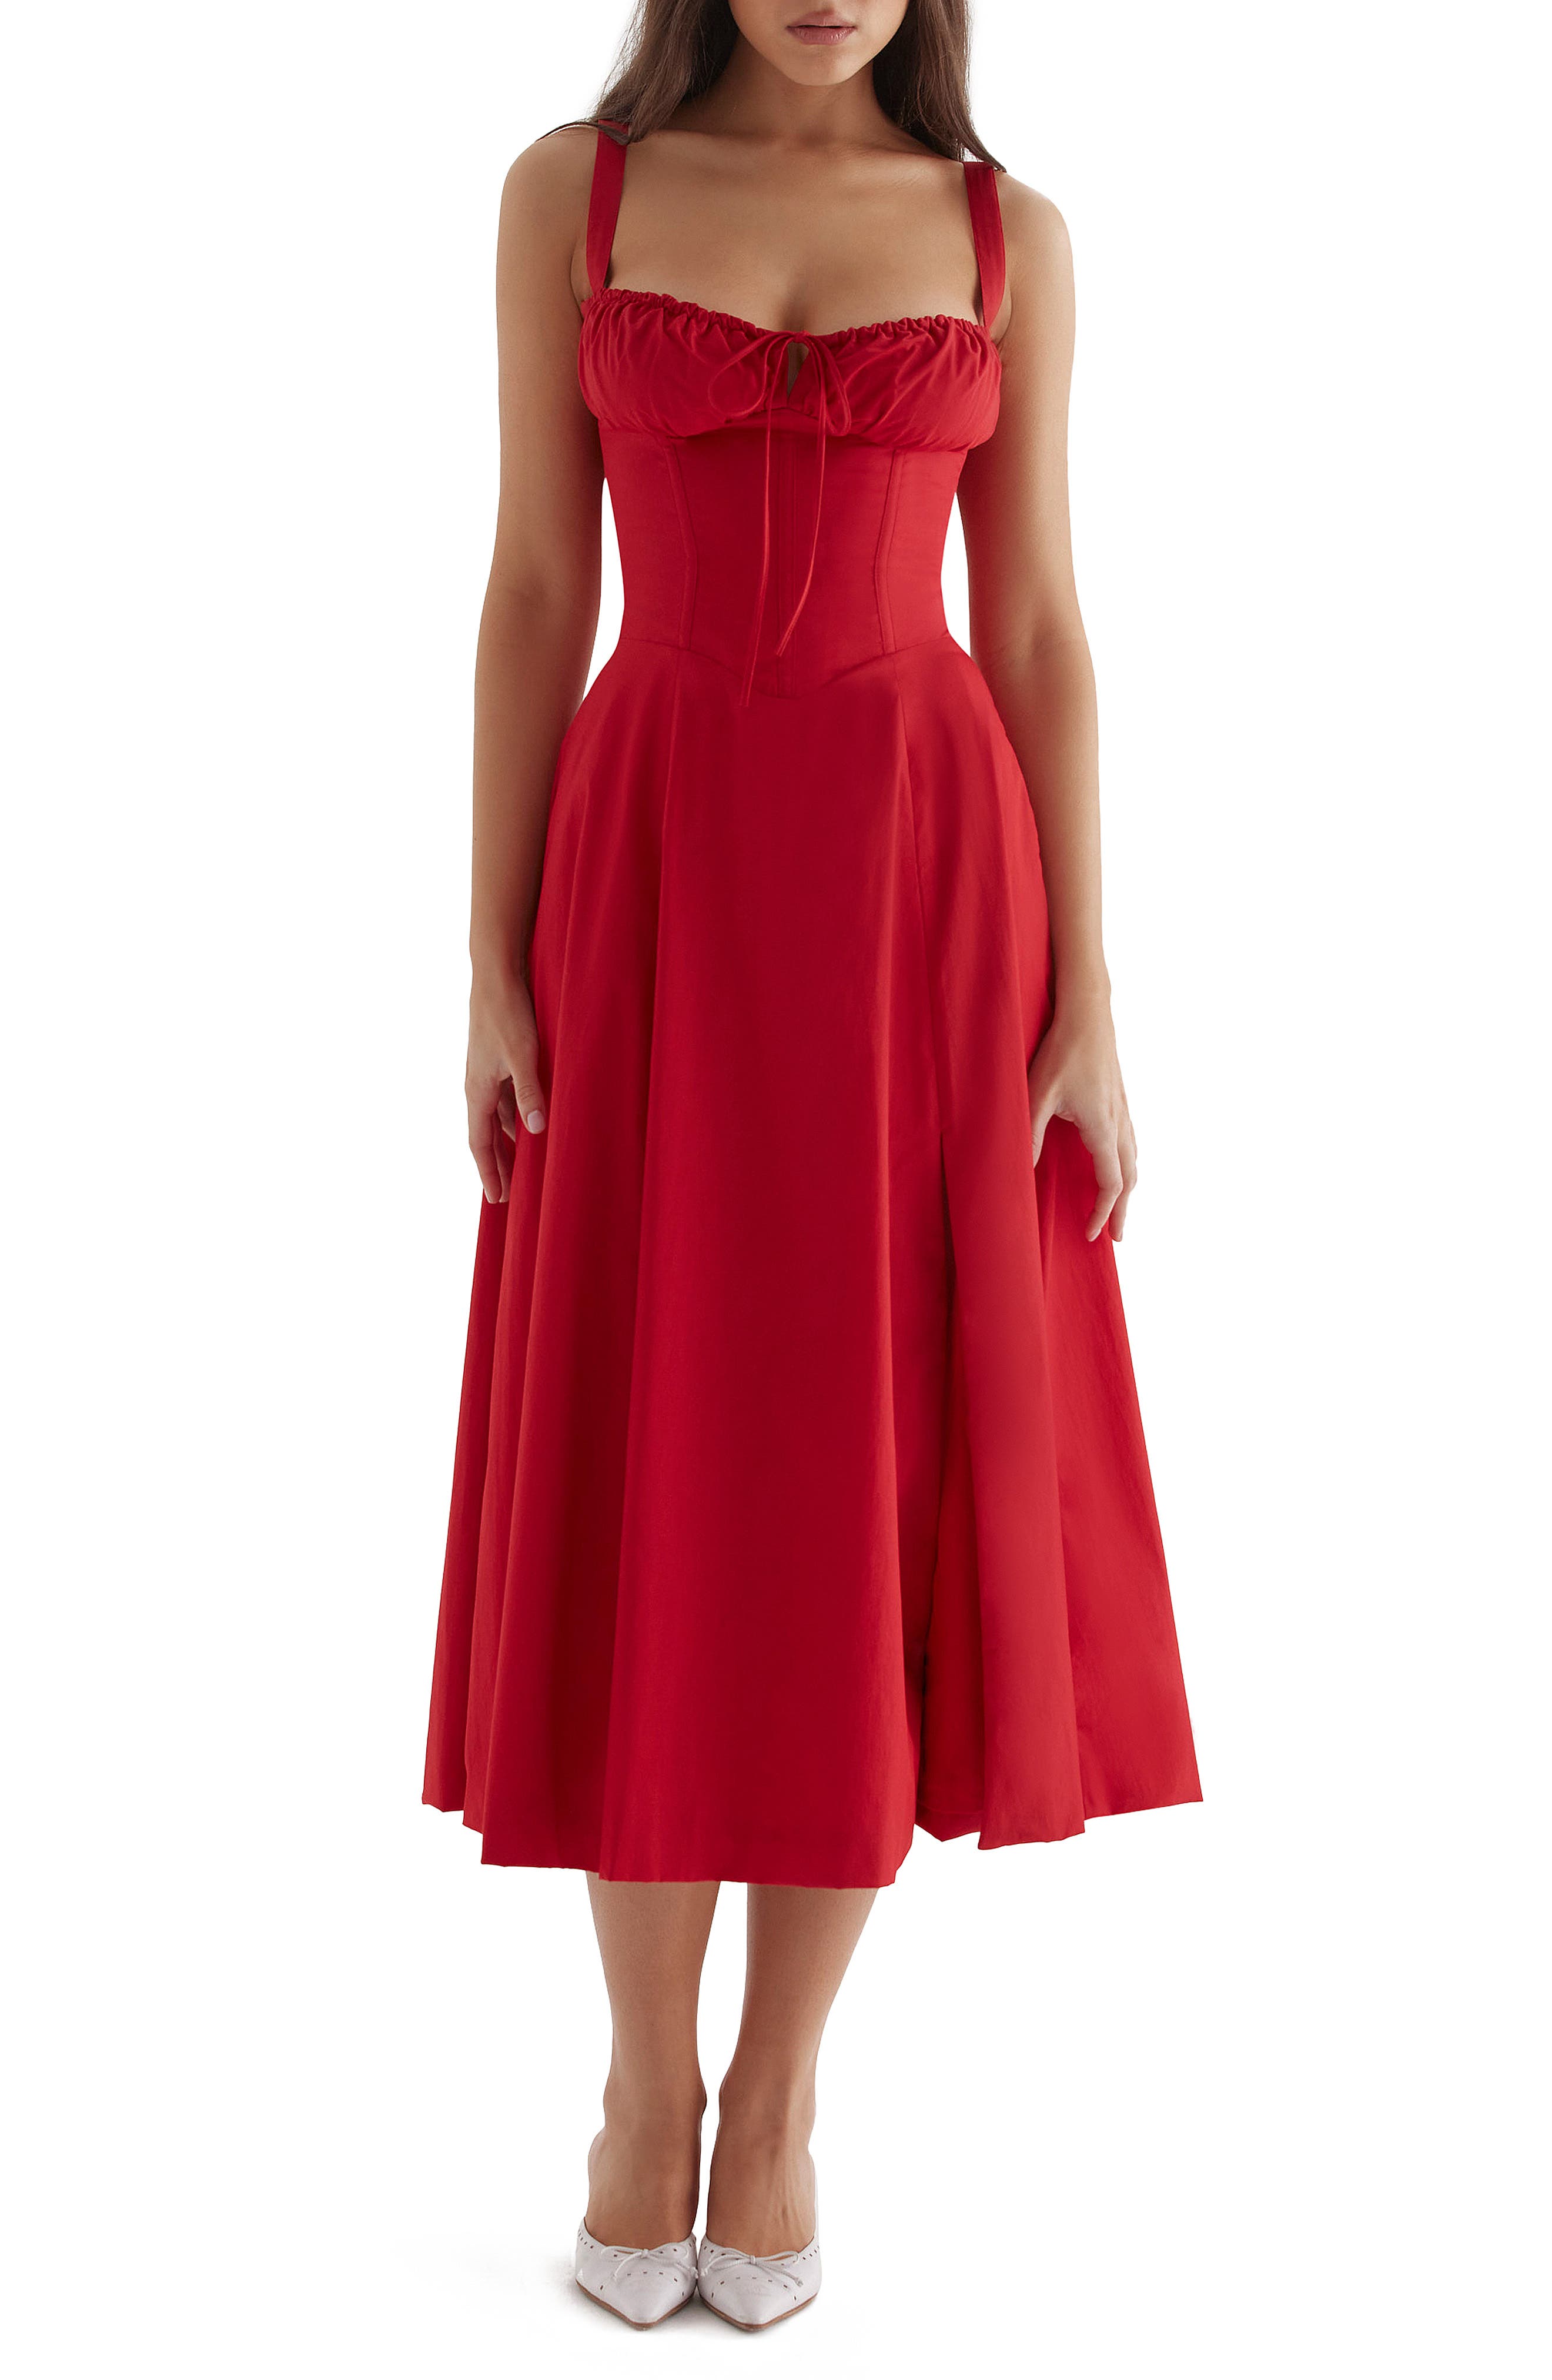 red dress women’s clothing